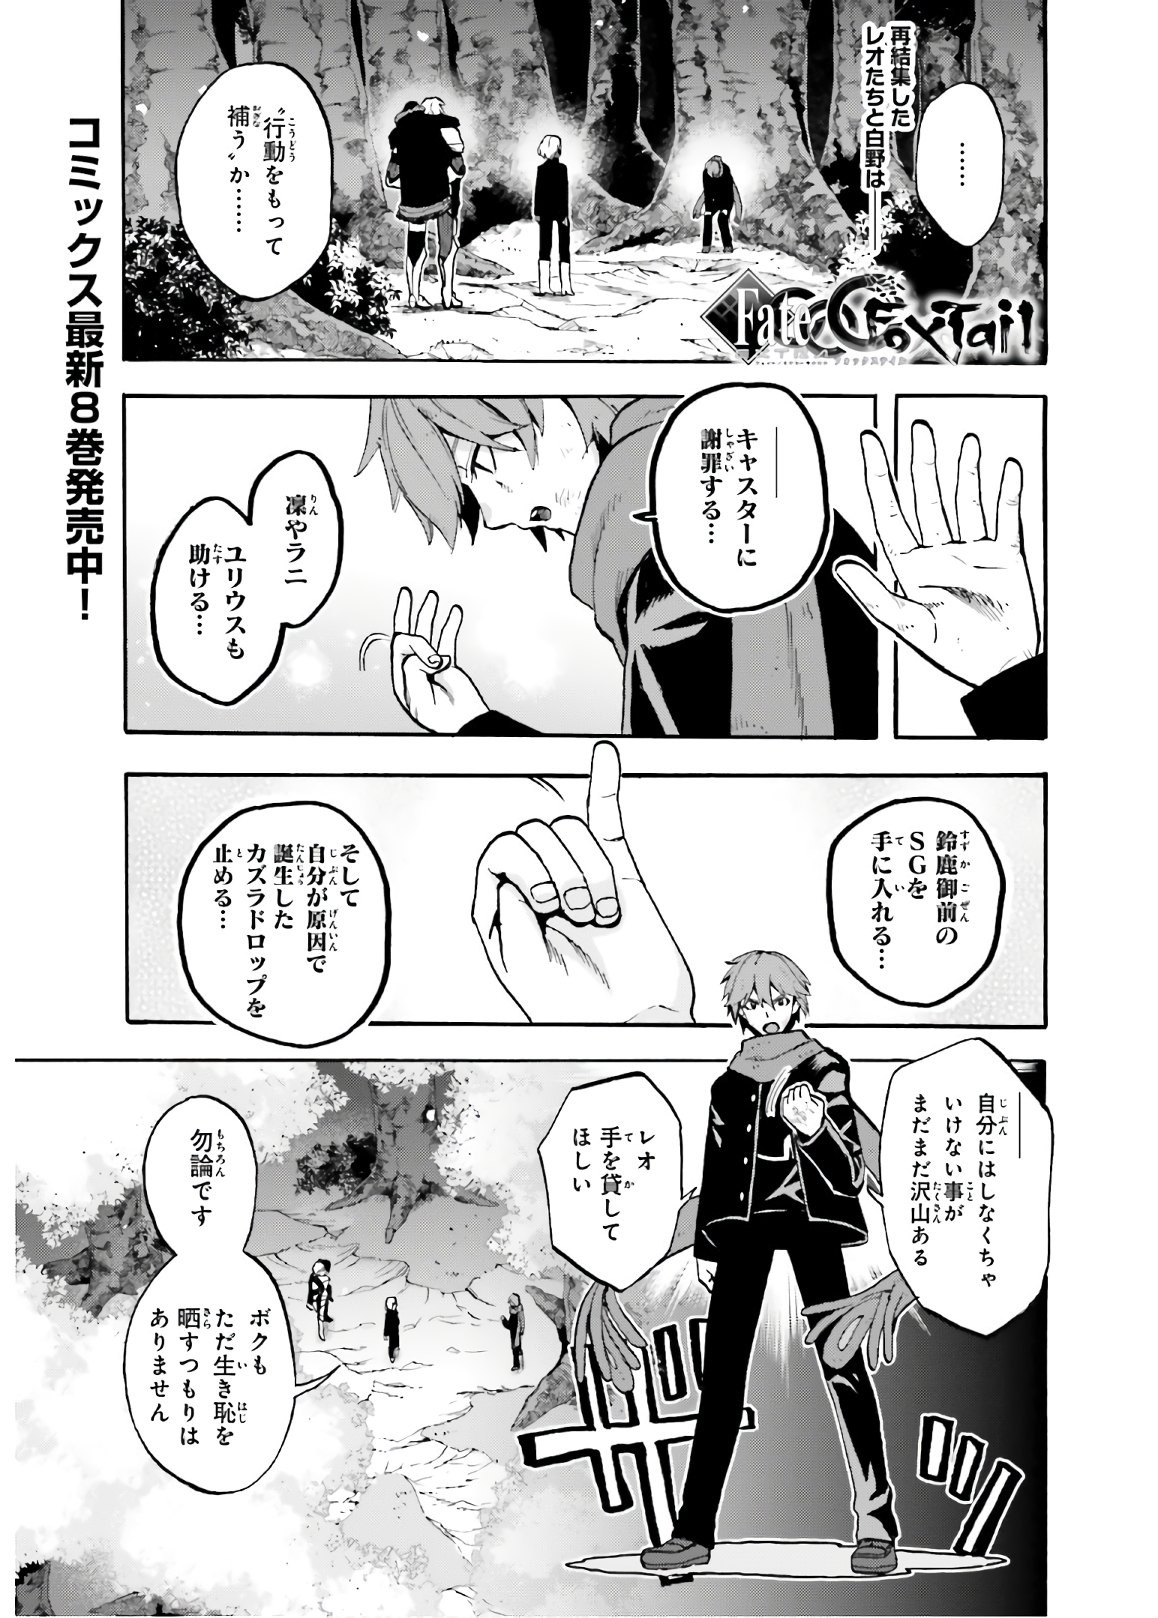 Fate/Extra CCC Fox Tail - Chapter 60.5 - Page 1